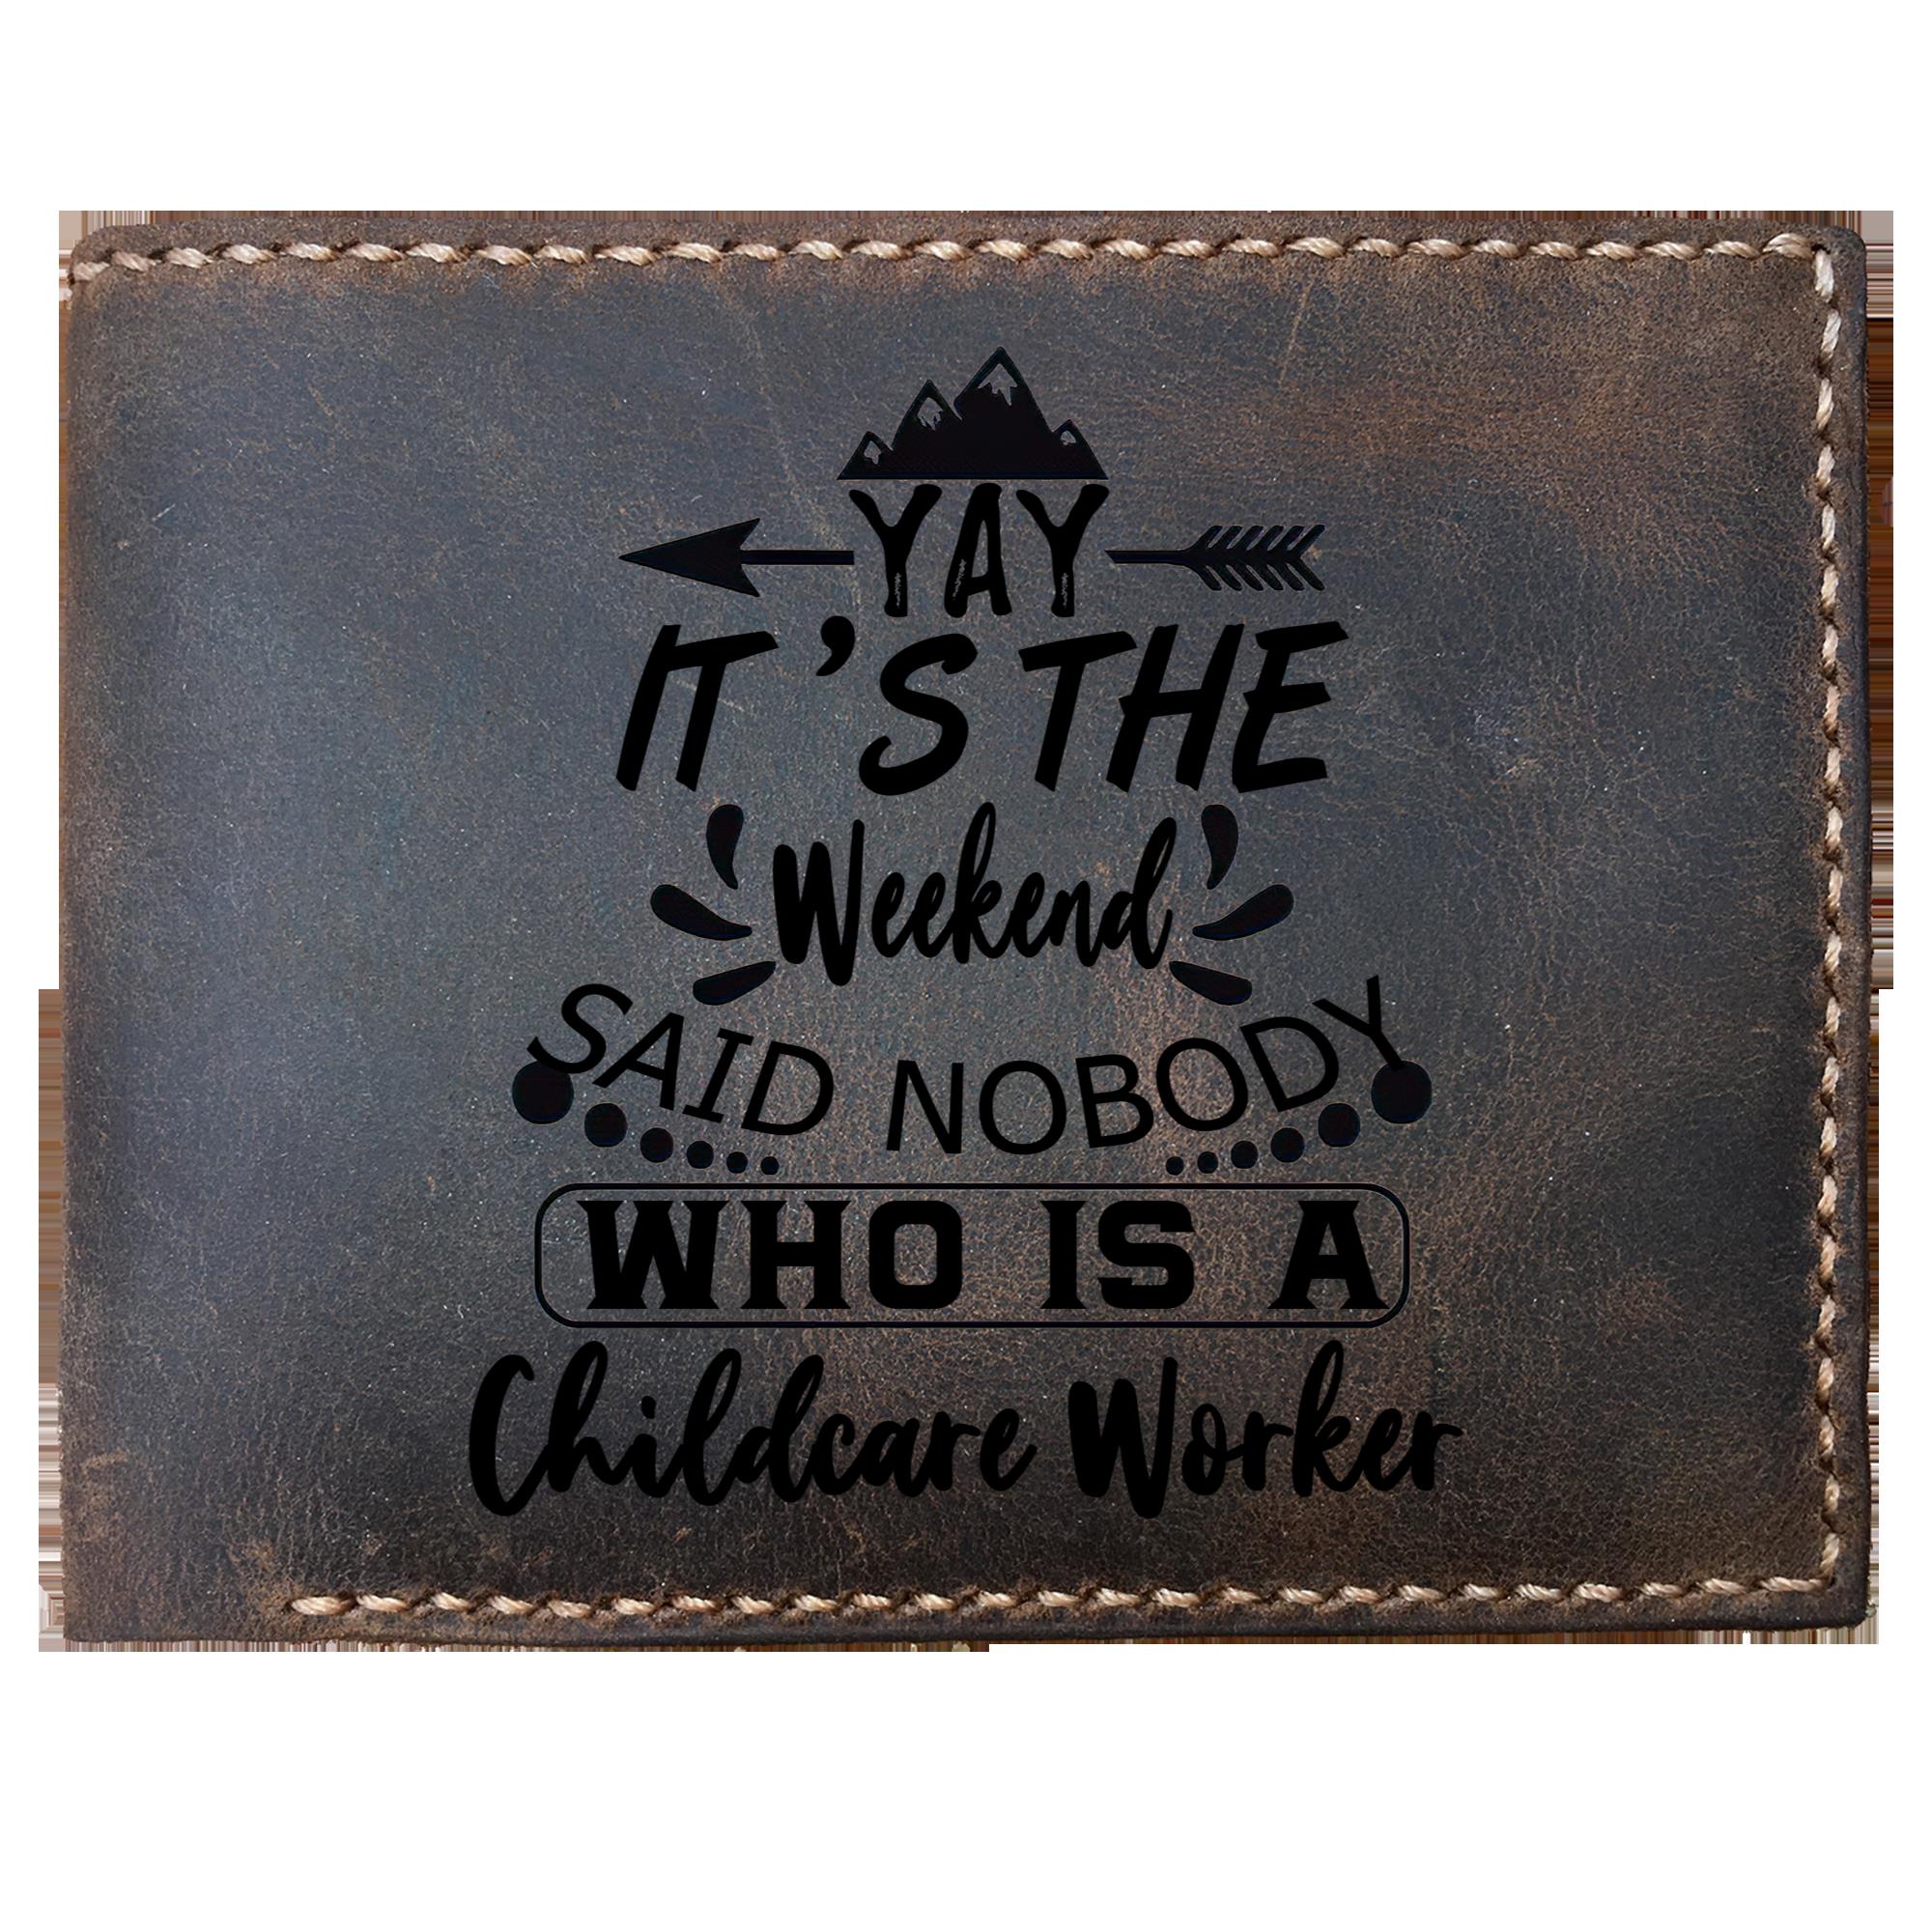 Skitongifts Funny Custom Laser Engraved Bifold Leather Wallet For Men, It's The Weekend Said Nobody Who Is A Childcare Worker, Father's Day Gifts